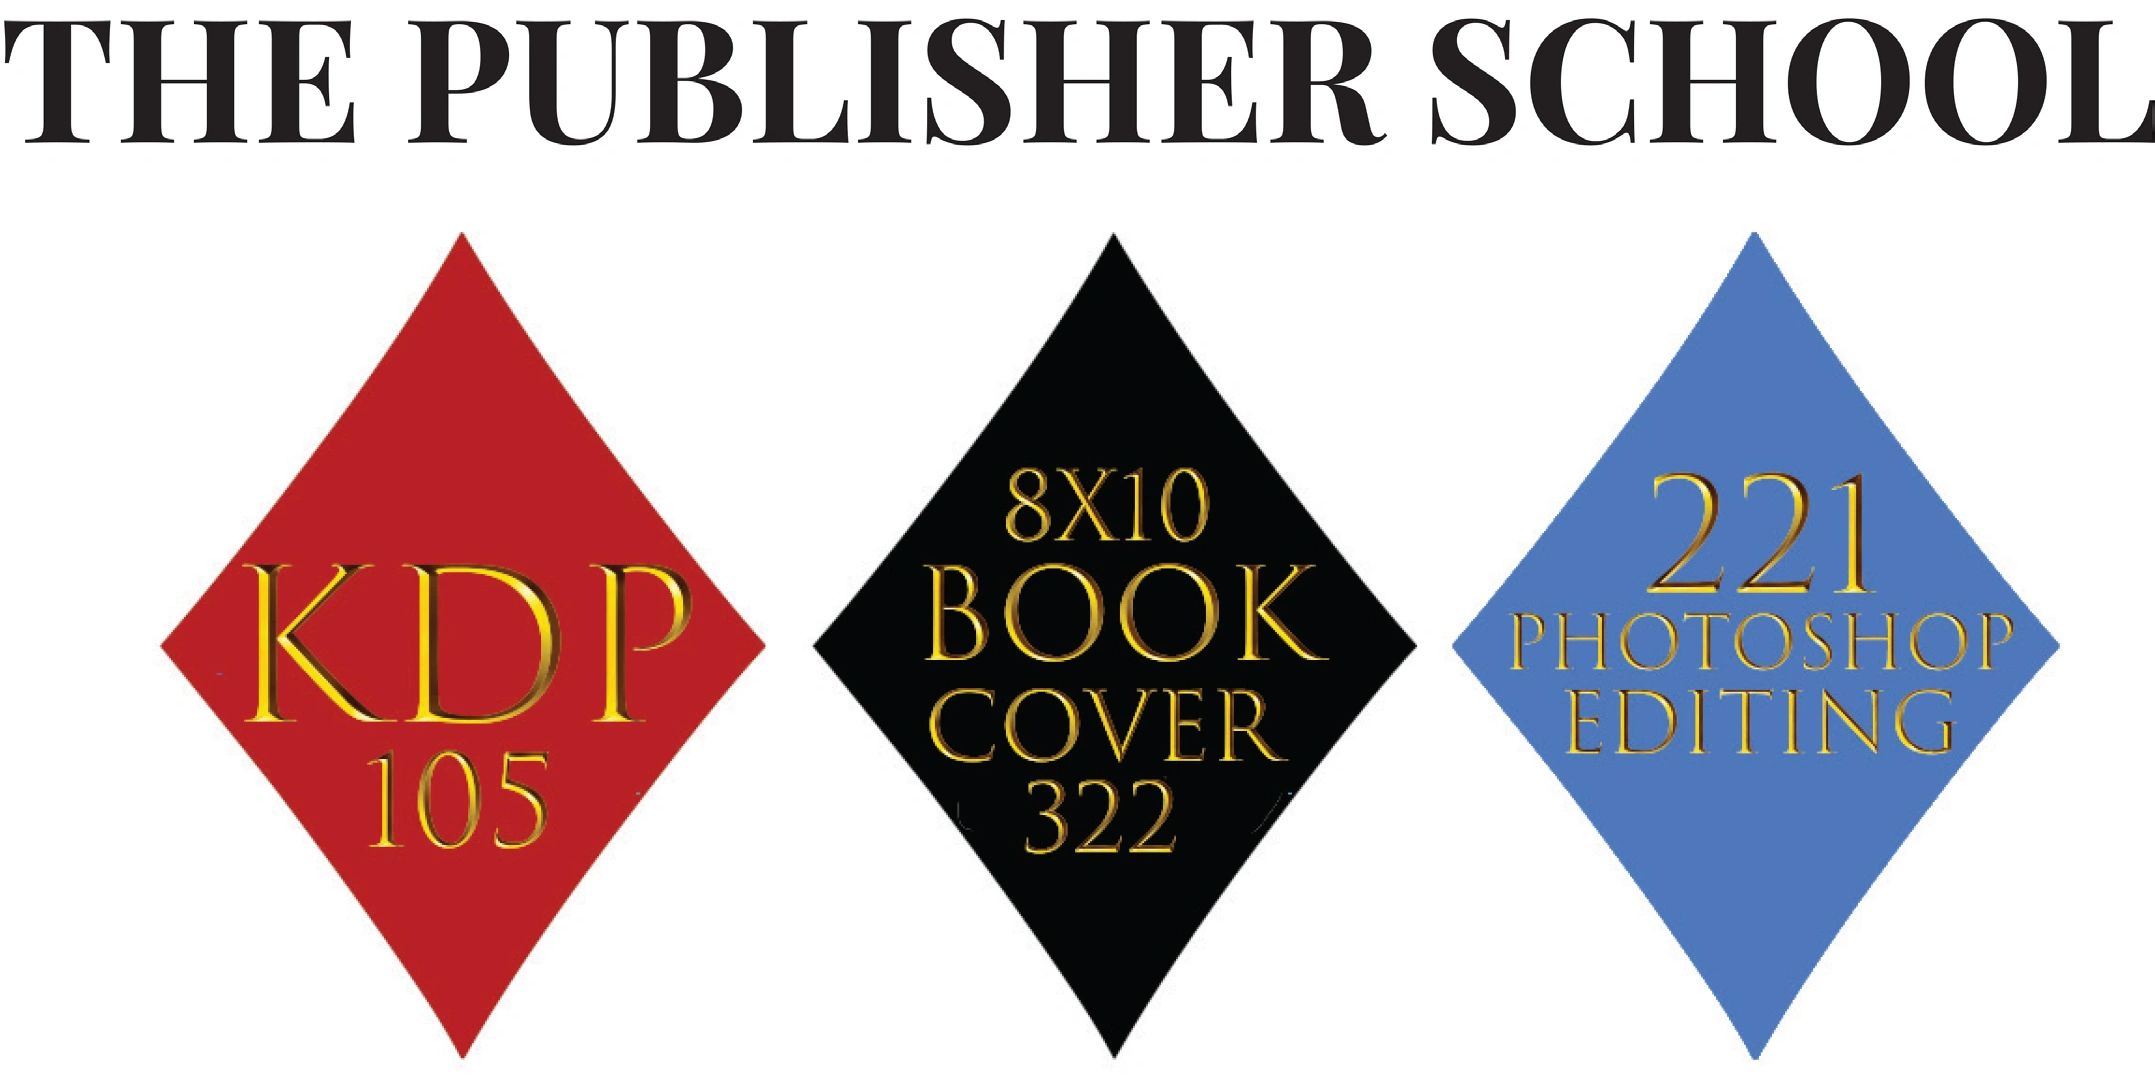 The Publisher School